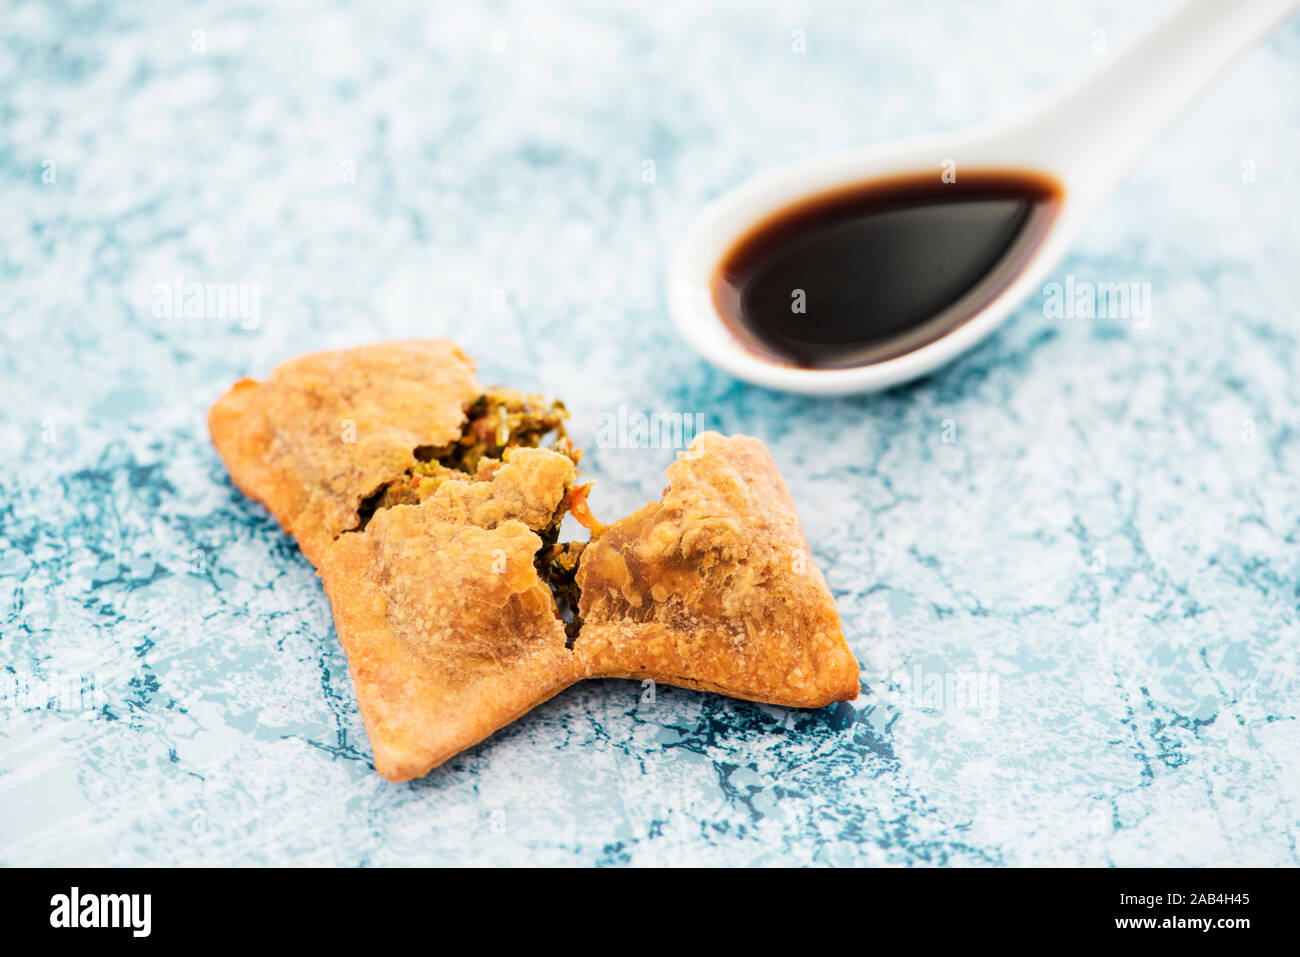 high angle view of an open Indian samosa and a ceramic spoon with a dark sauce on a marbled stone surface Stock Photo